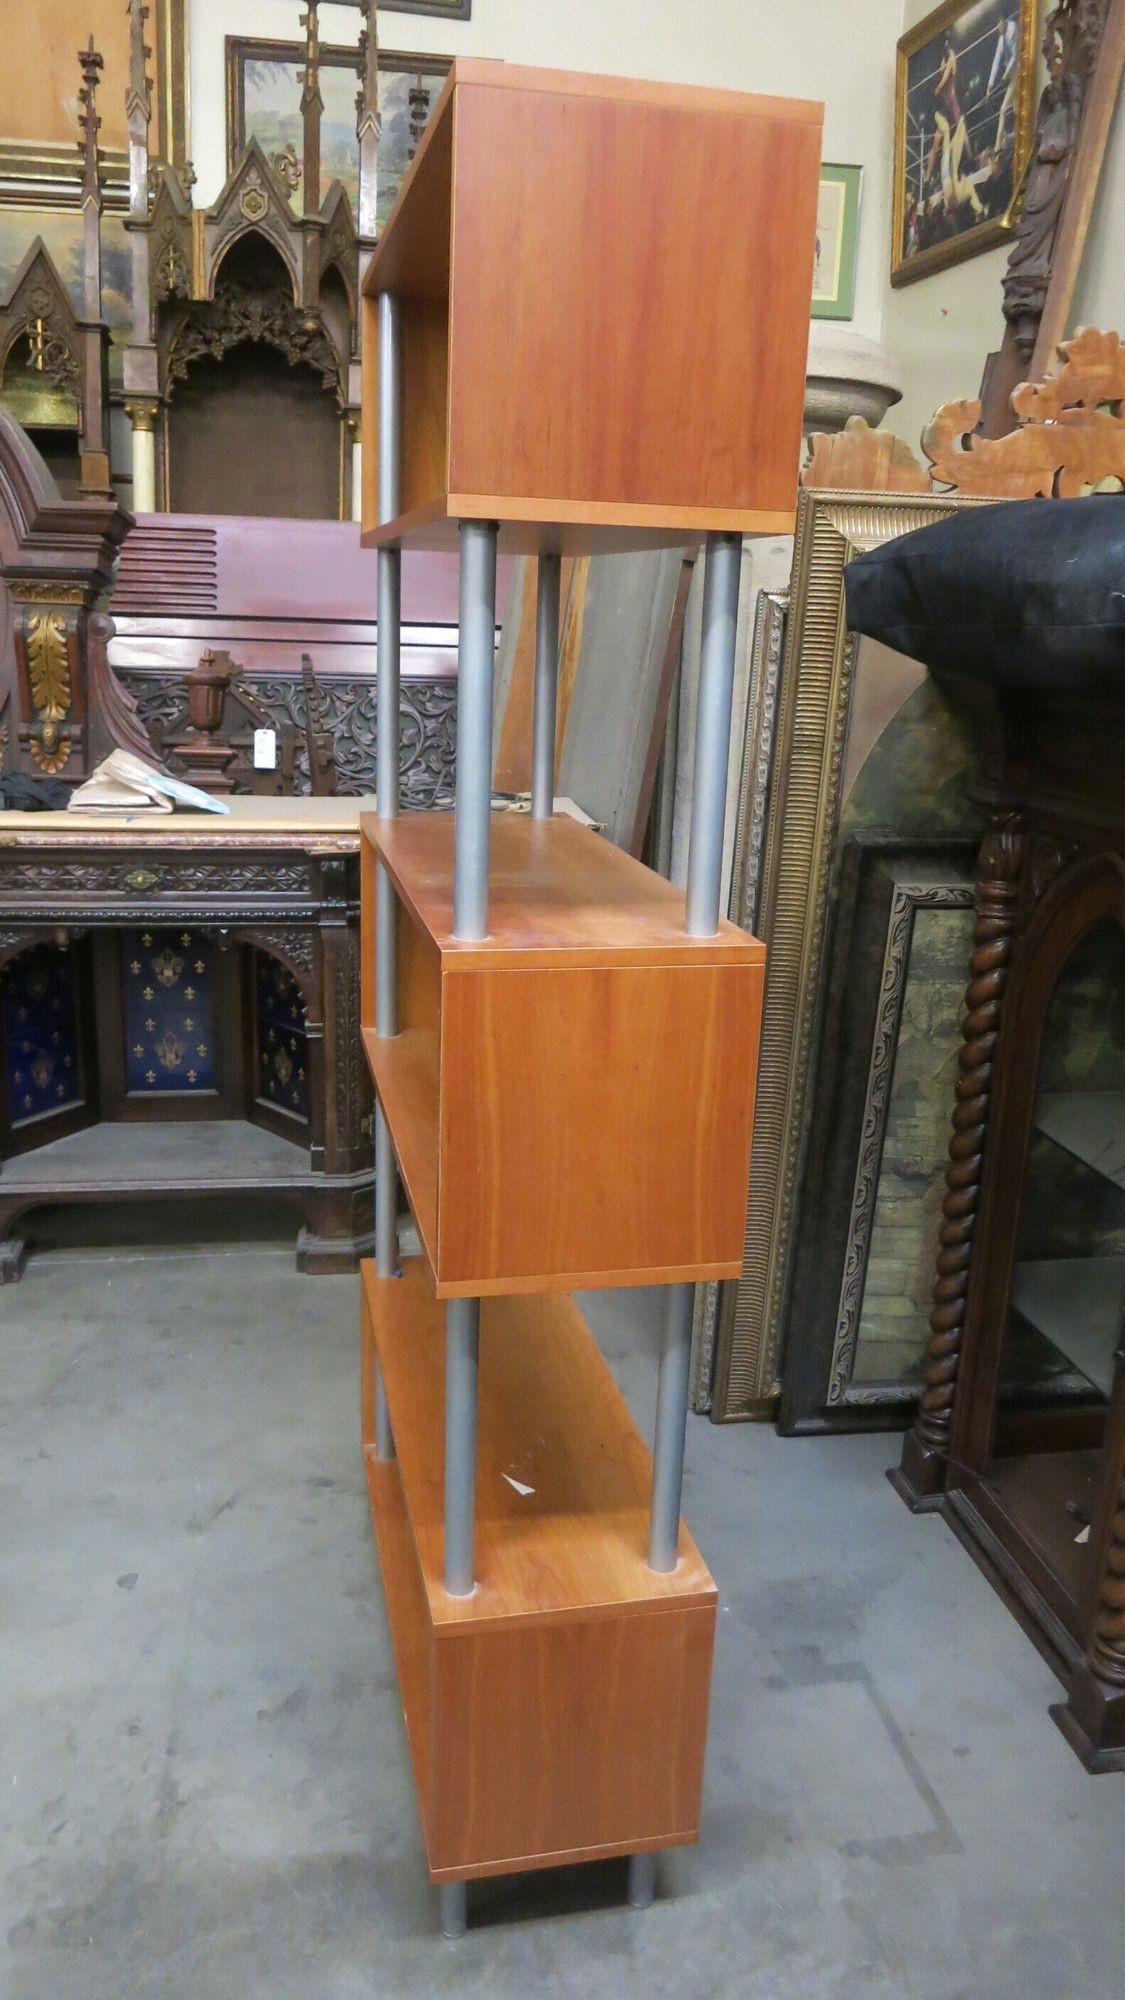 Post Modern Cubist Steel Rod Book Shelf, Circa 1990 In Excellent Condition For Sale In Van Nuys, CA